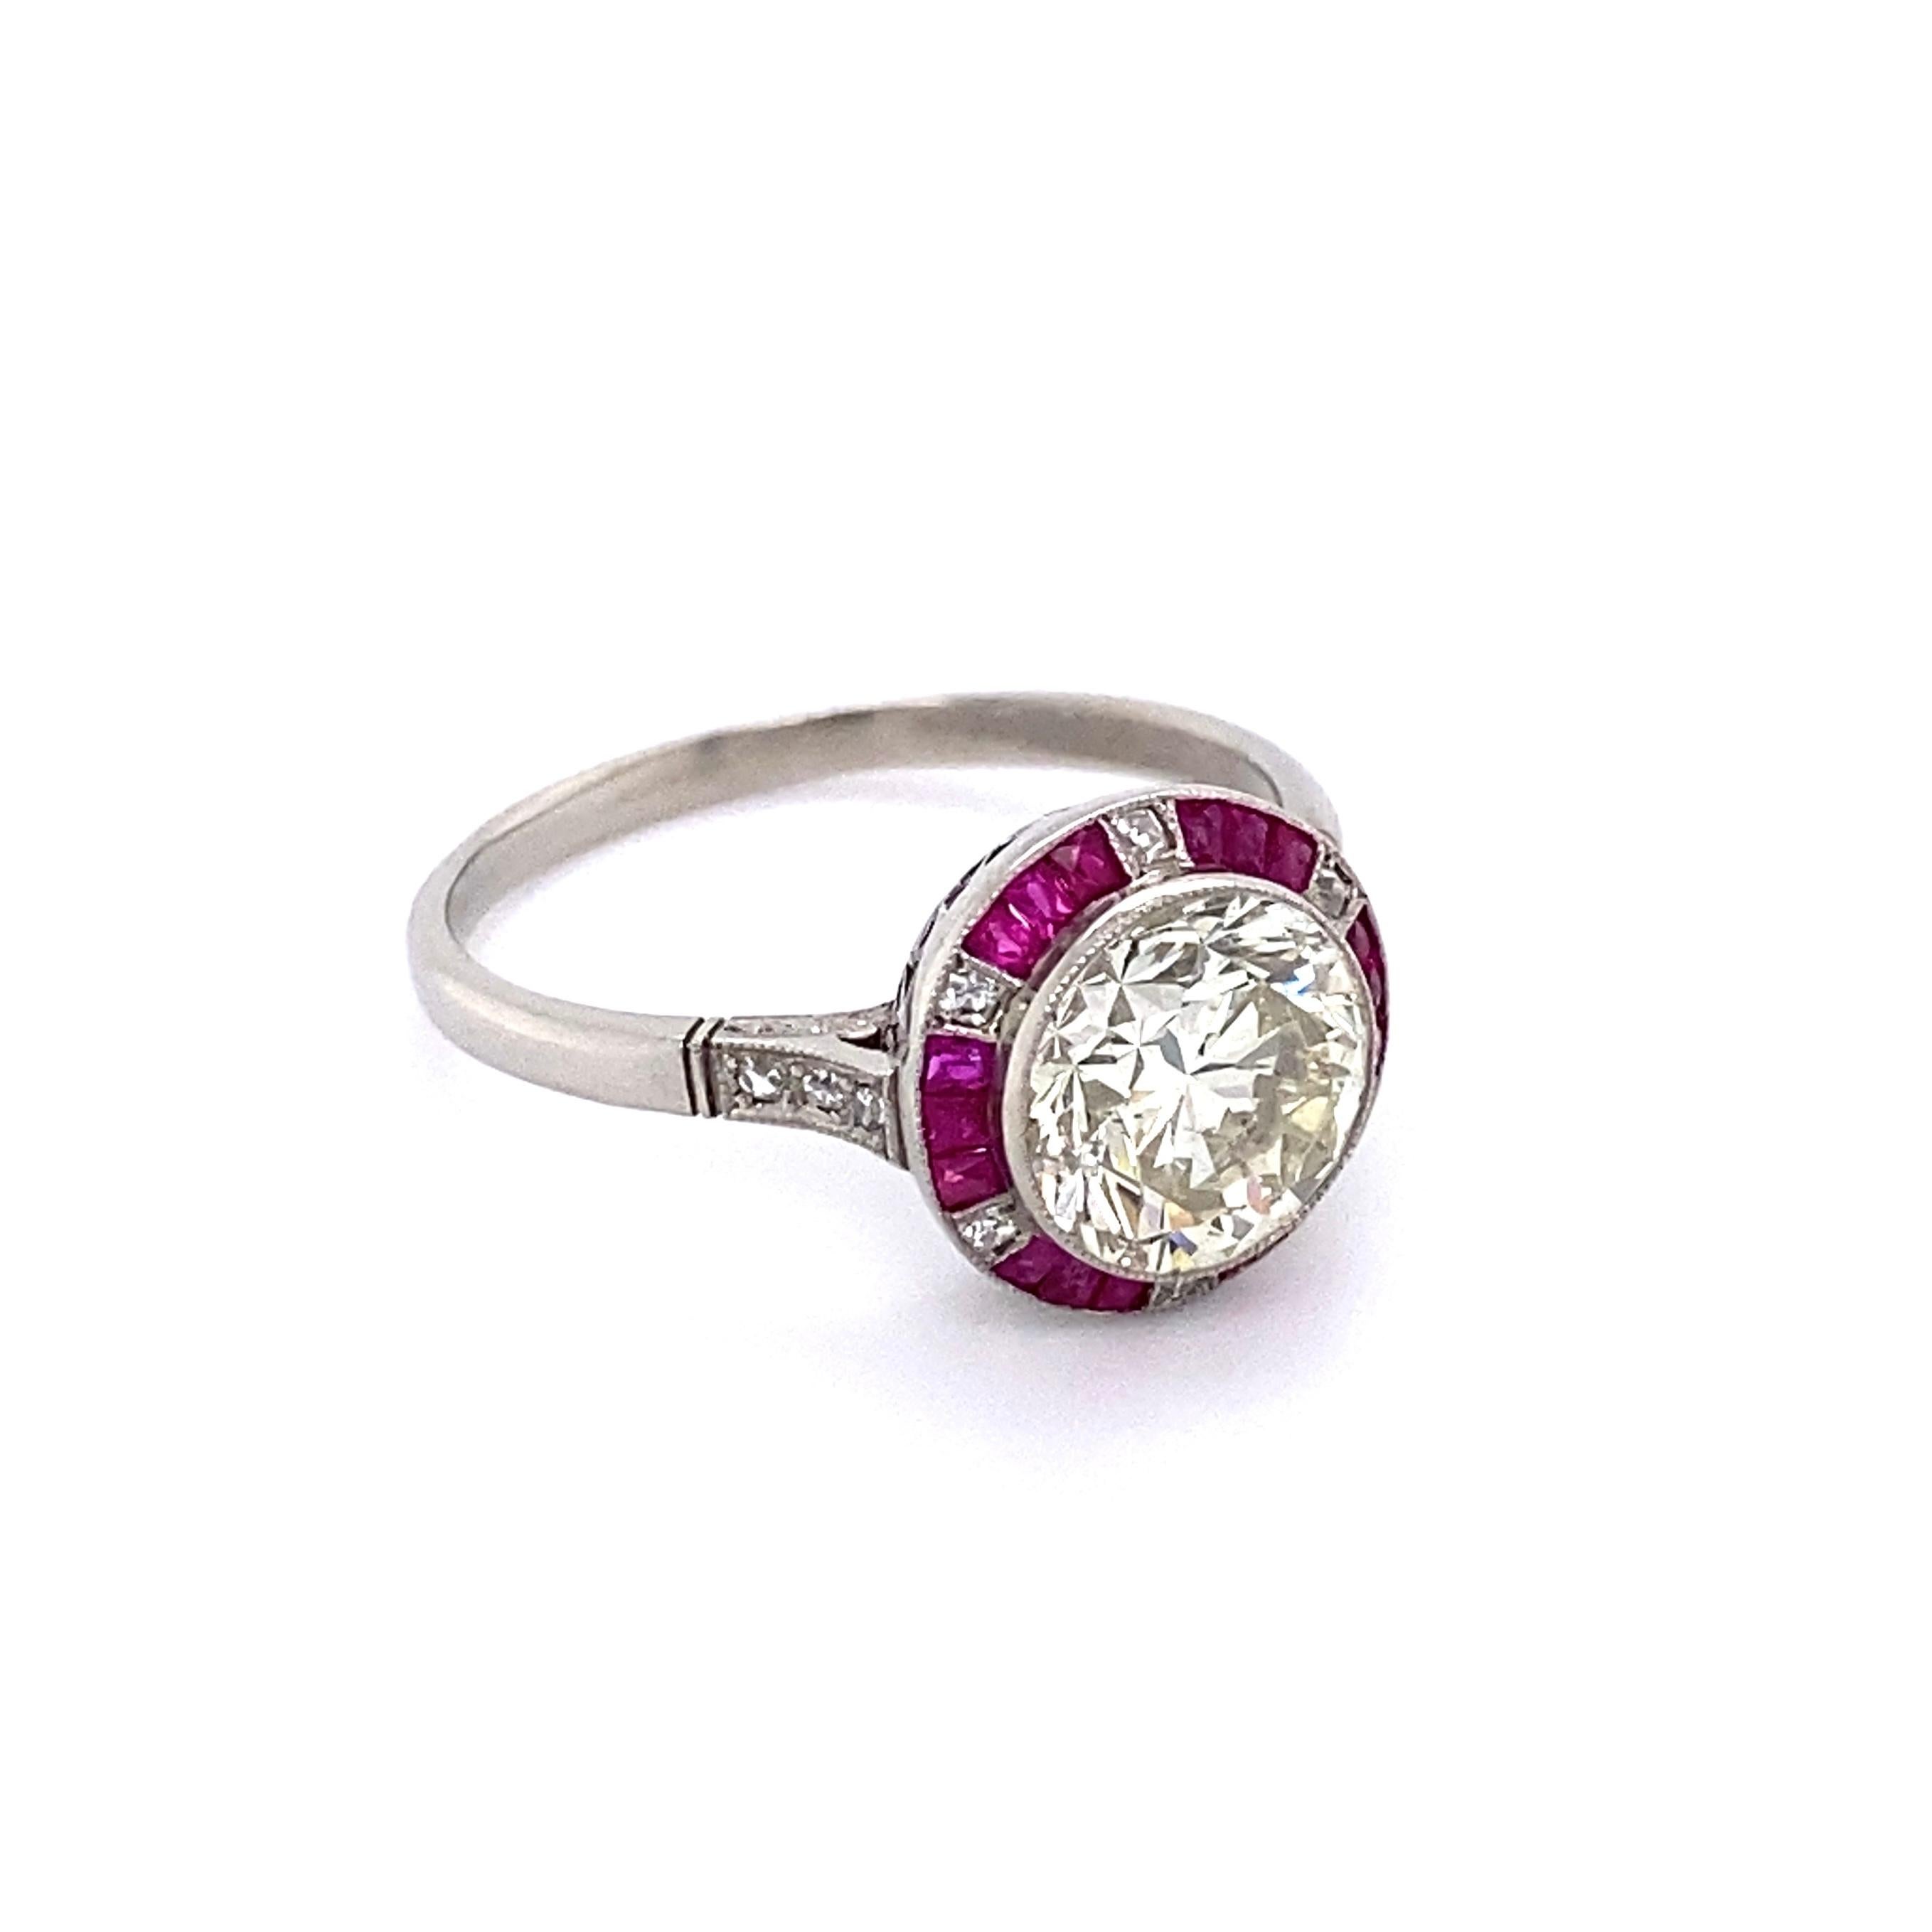 Simply Beautiful! Finely detailed Art Deco Style Platinum Cocktail Halo Ring, center securely nestled with a Transitional Round Diamond, approx. 2.81 Carat. Color brown tint M and clarity is SI2/I1. Surrounded by calibrated Rubies, approx. 0.78tcw